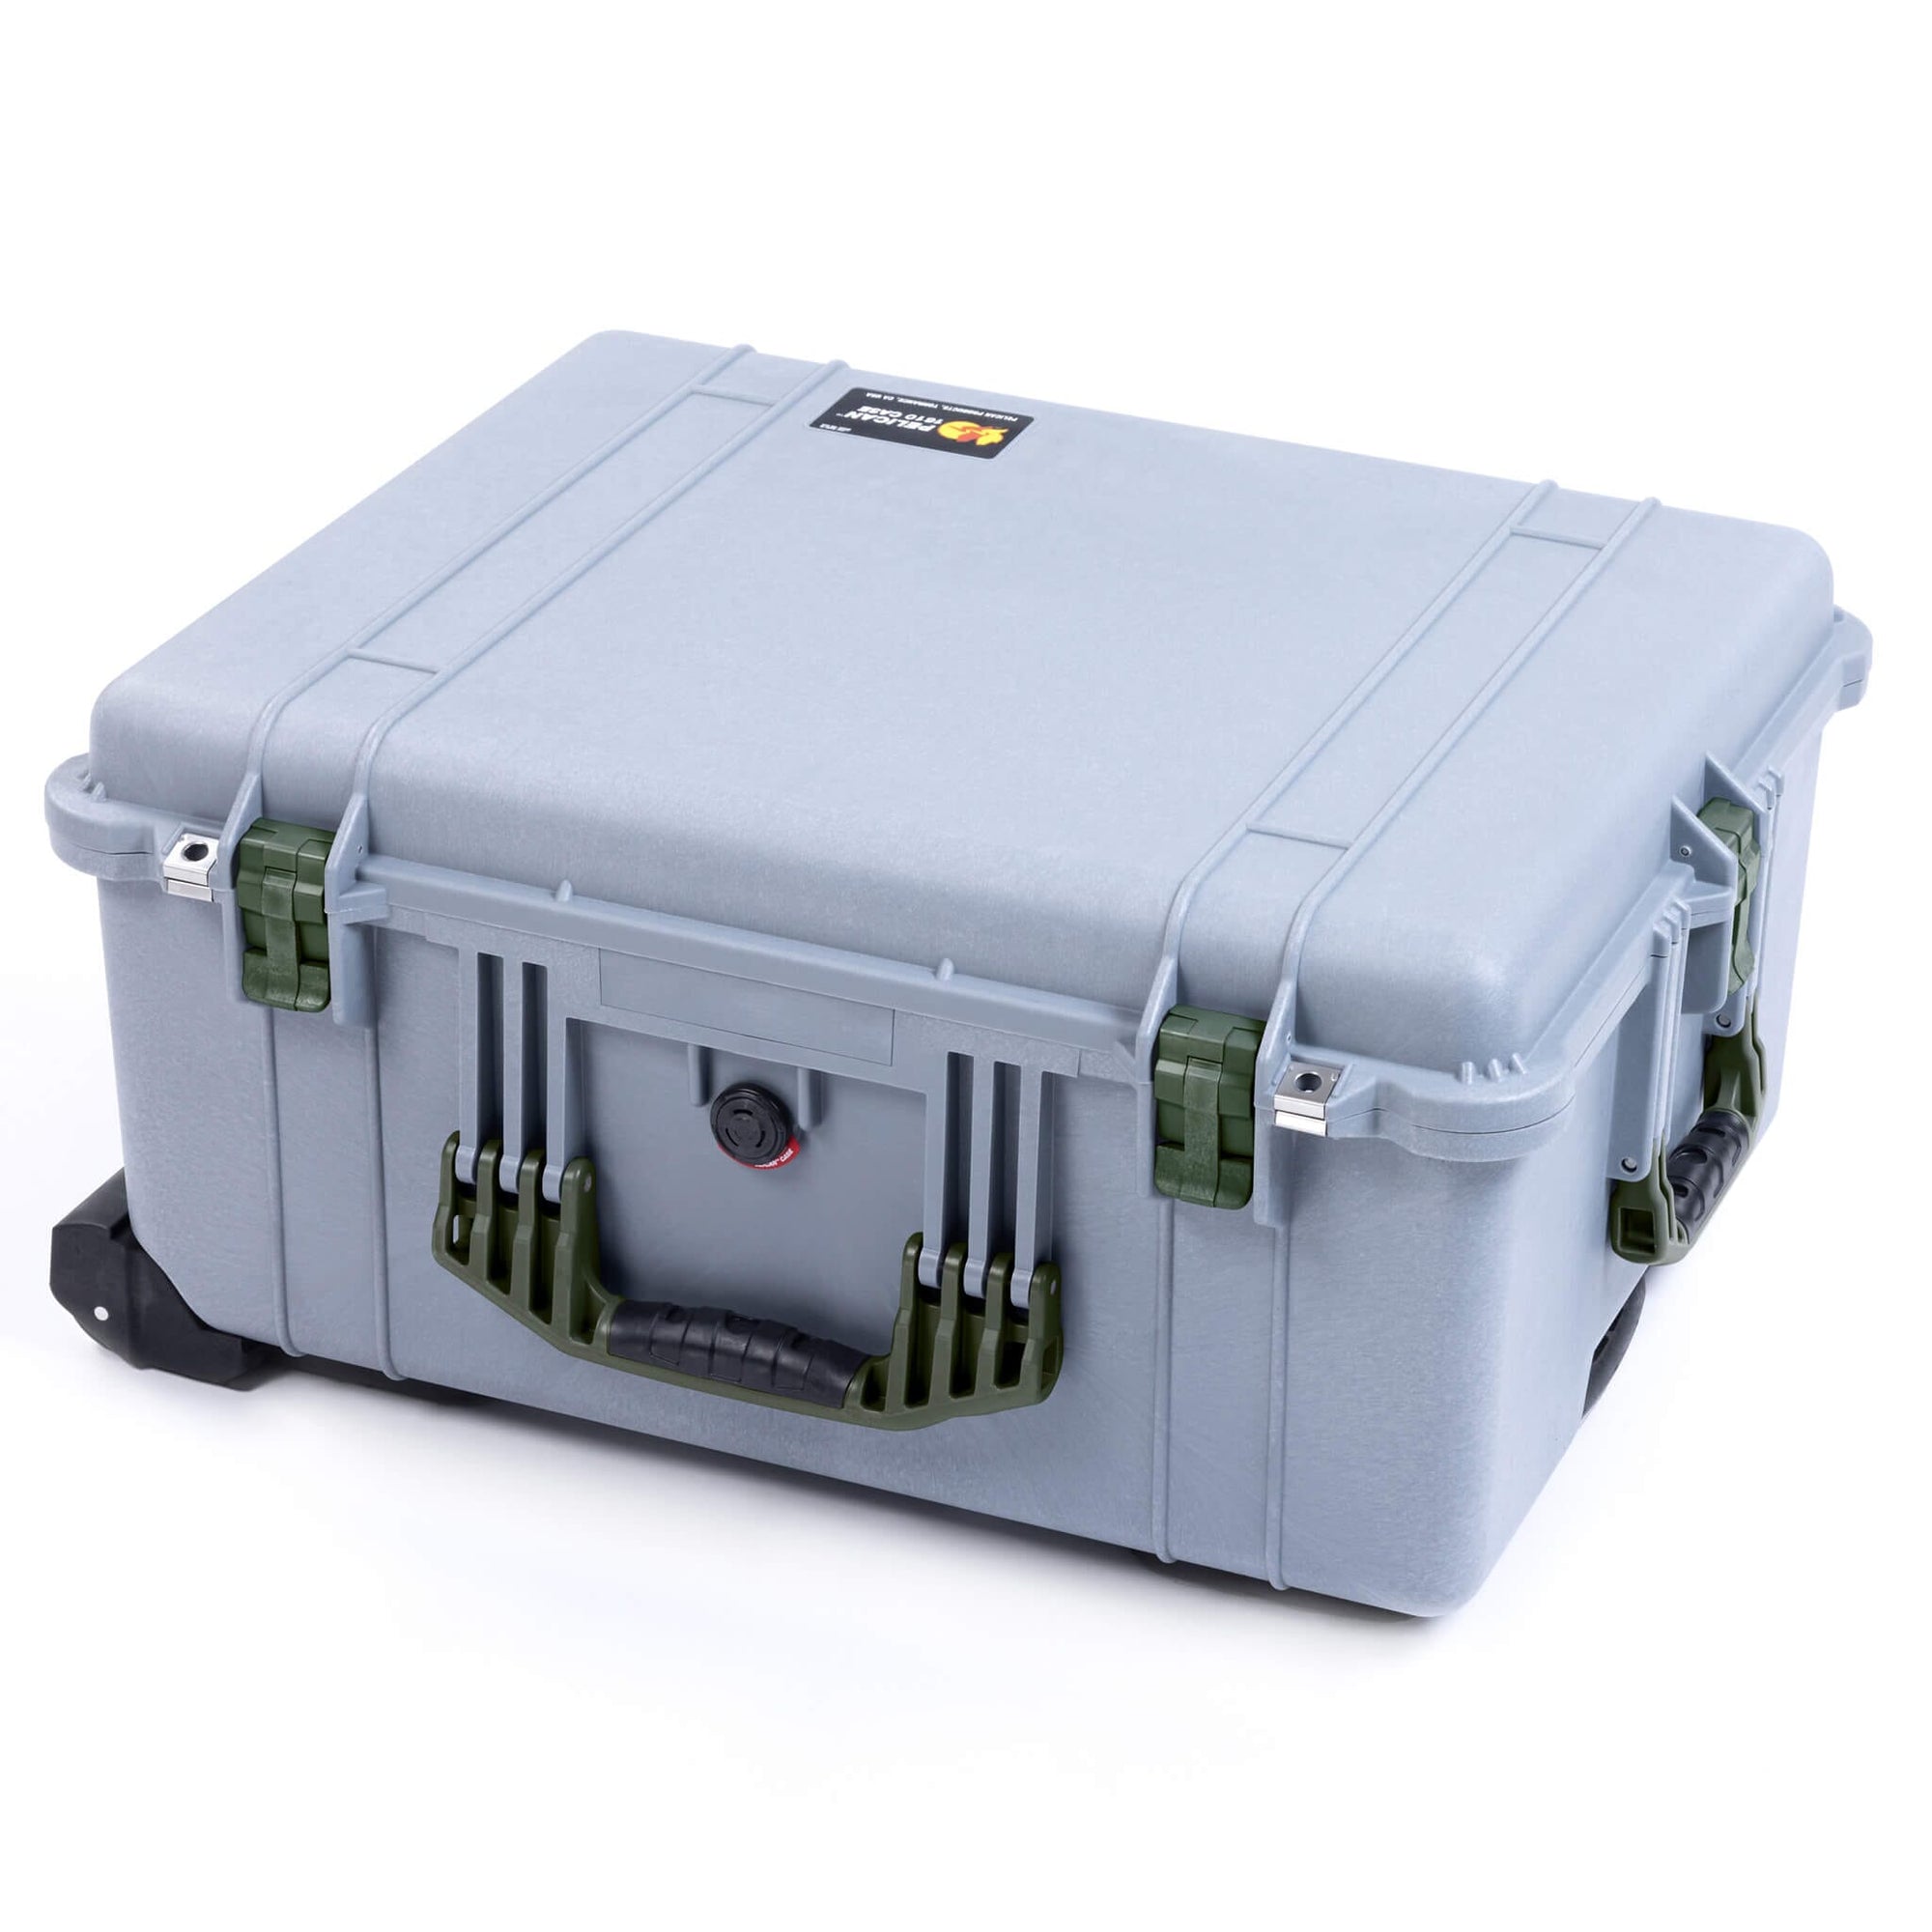 Pelican 1610 Case, Silver with OD Green Handles & Latches ColorCase 